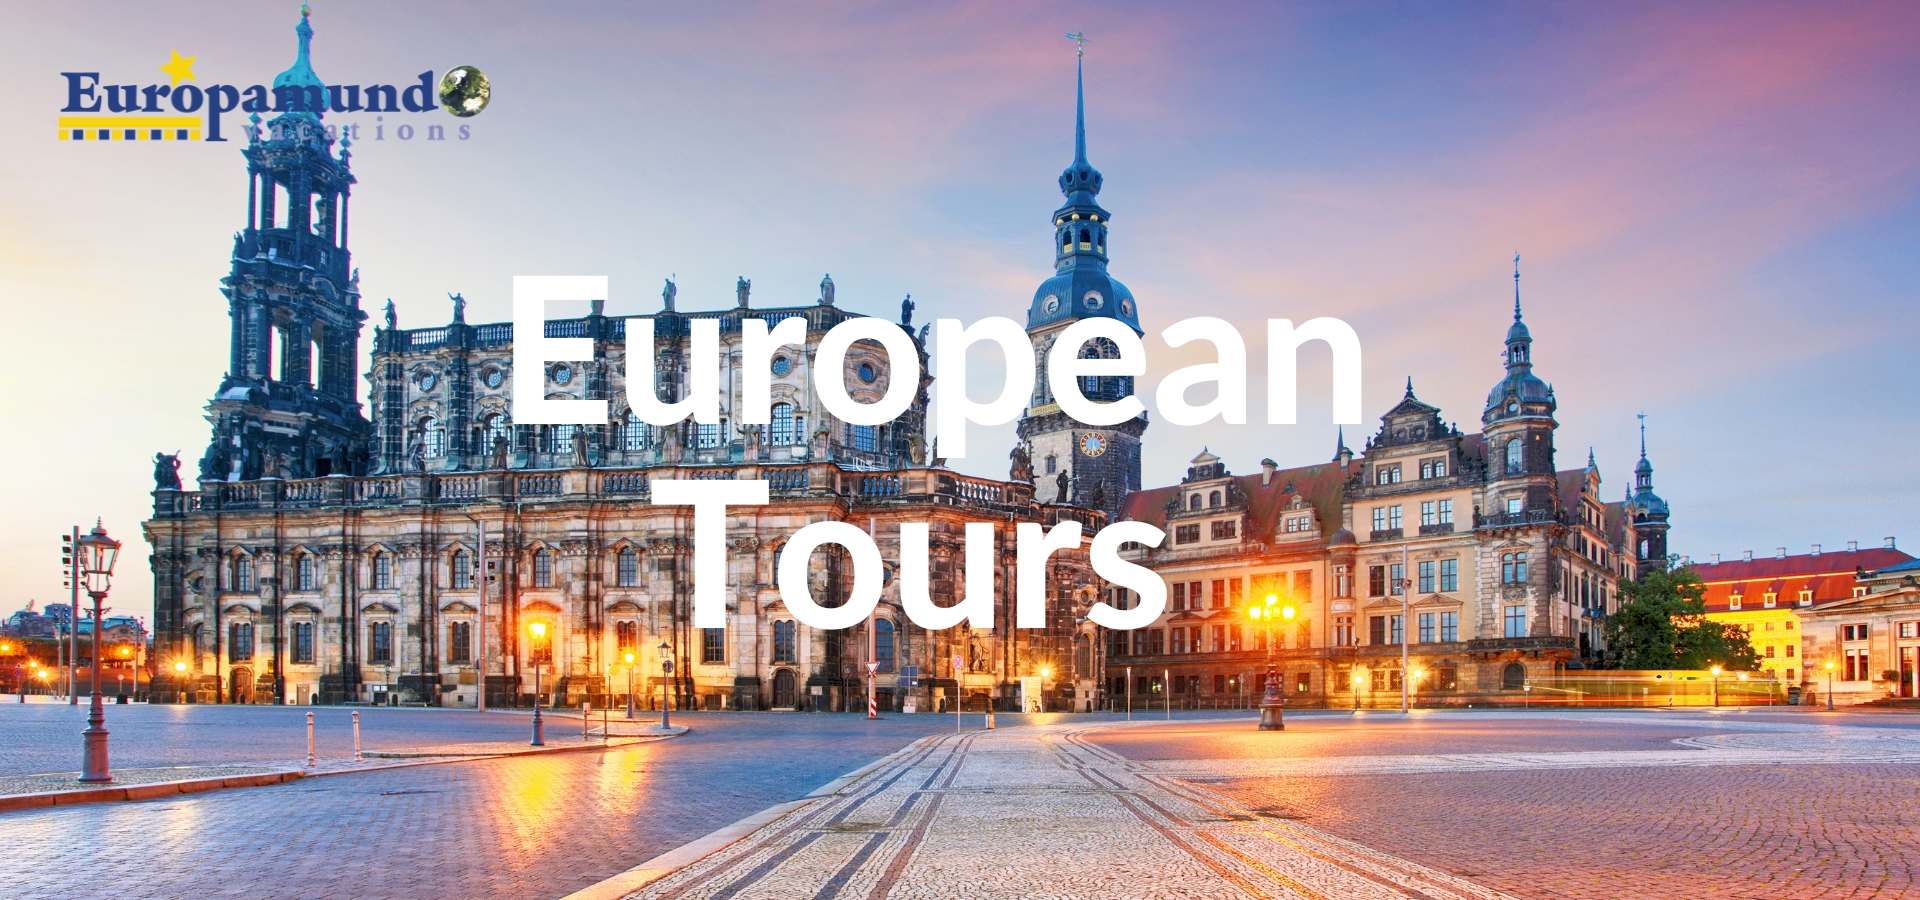 Trafalgar tours packages from eu holidays